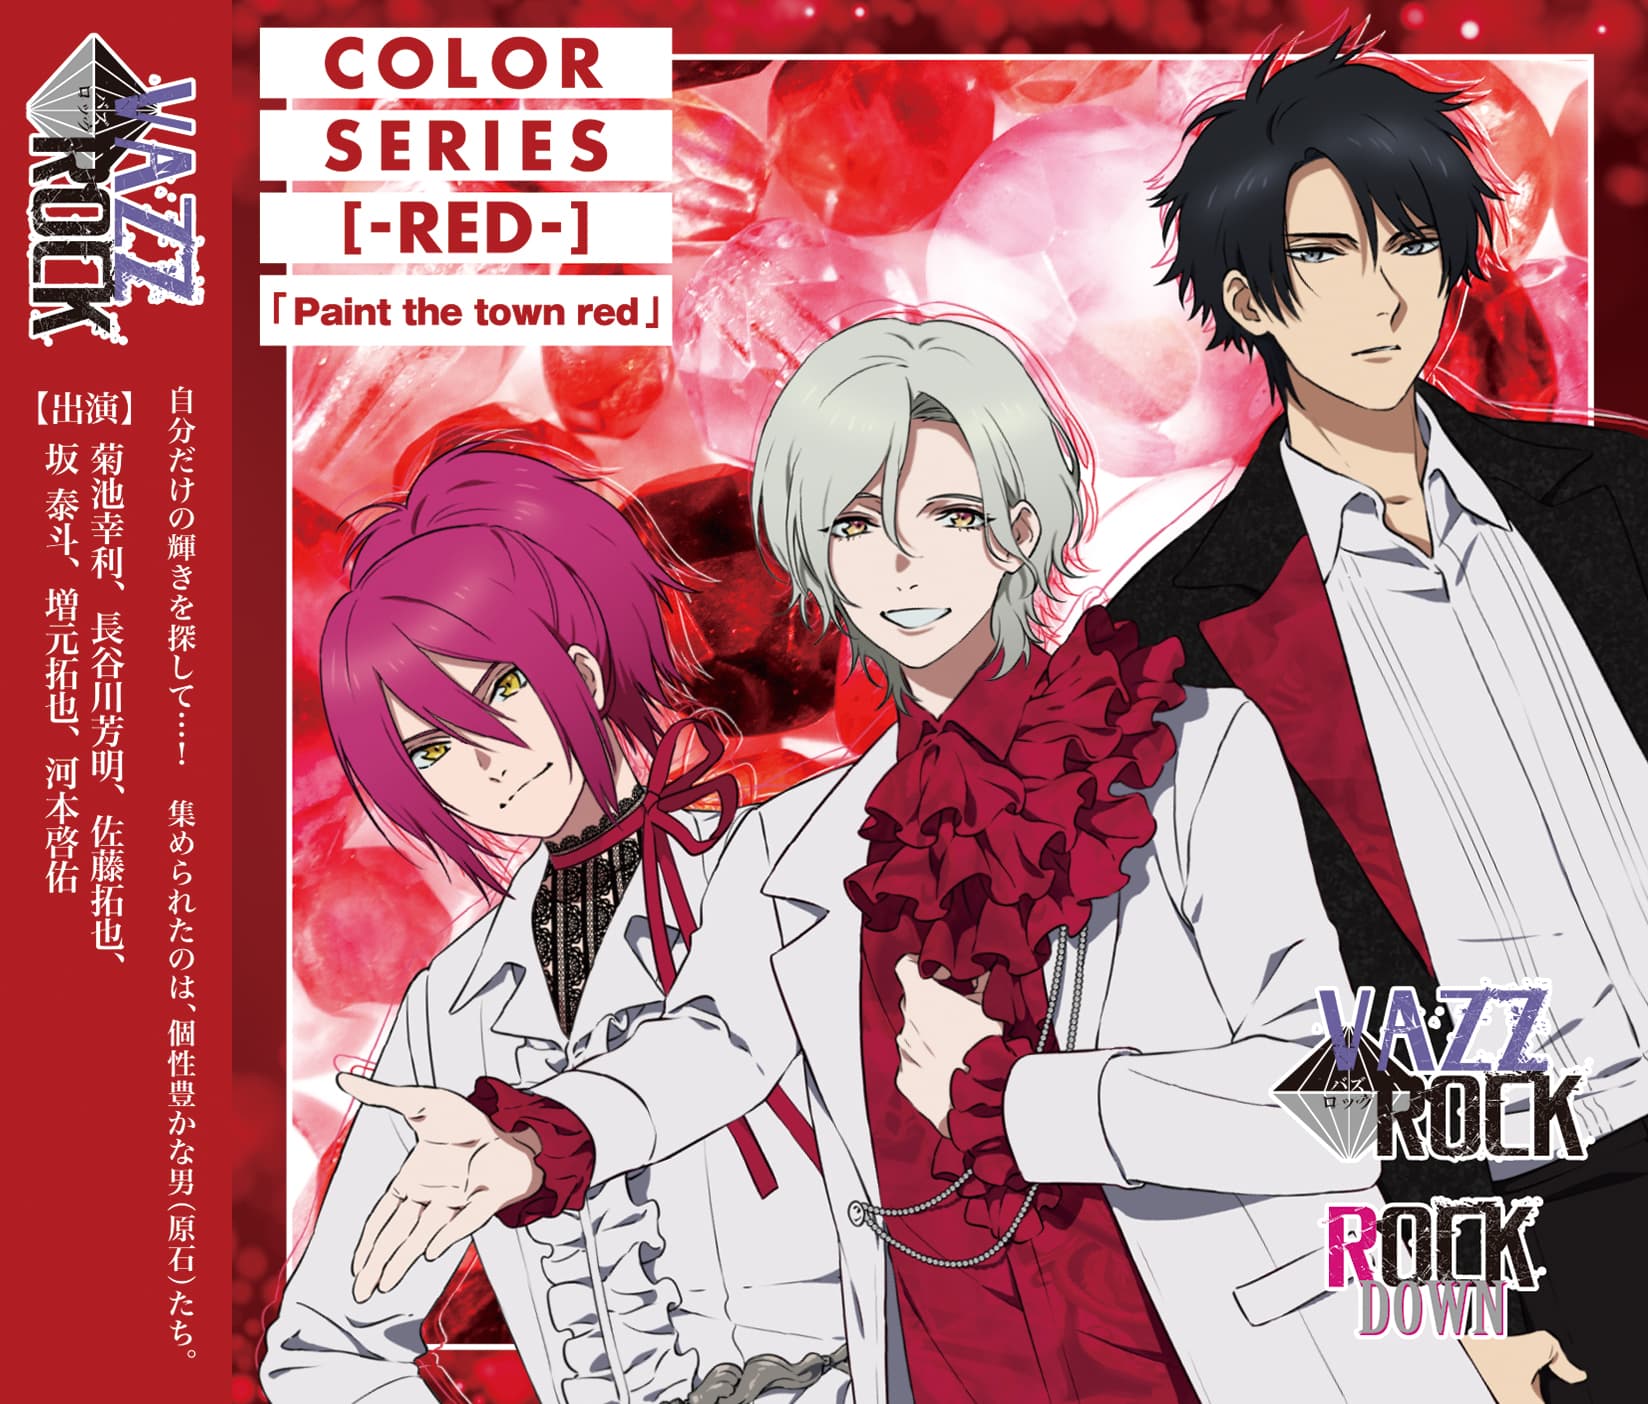 「VAZZROCK」COLORシリーズ [-RED-] 「Paint the town red」